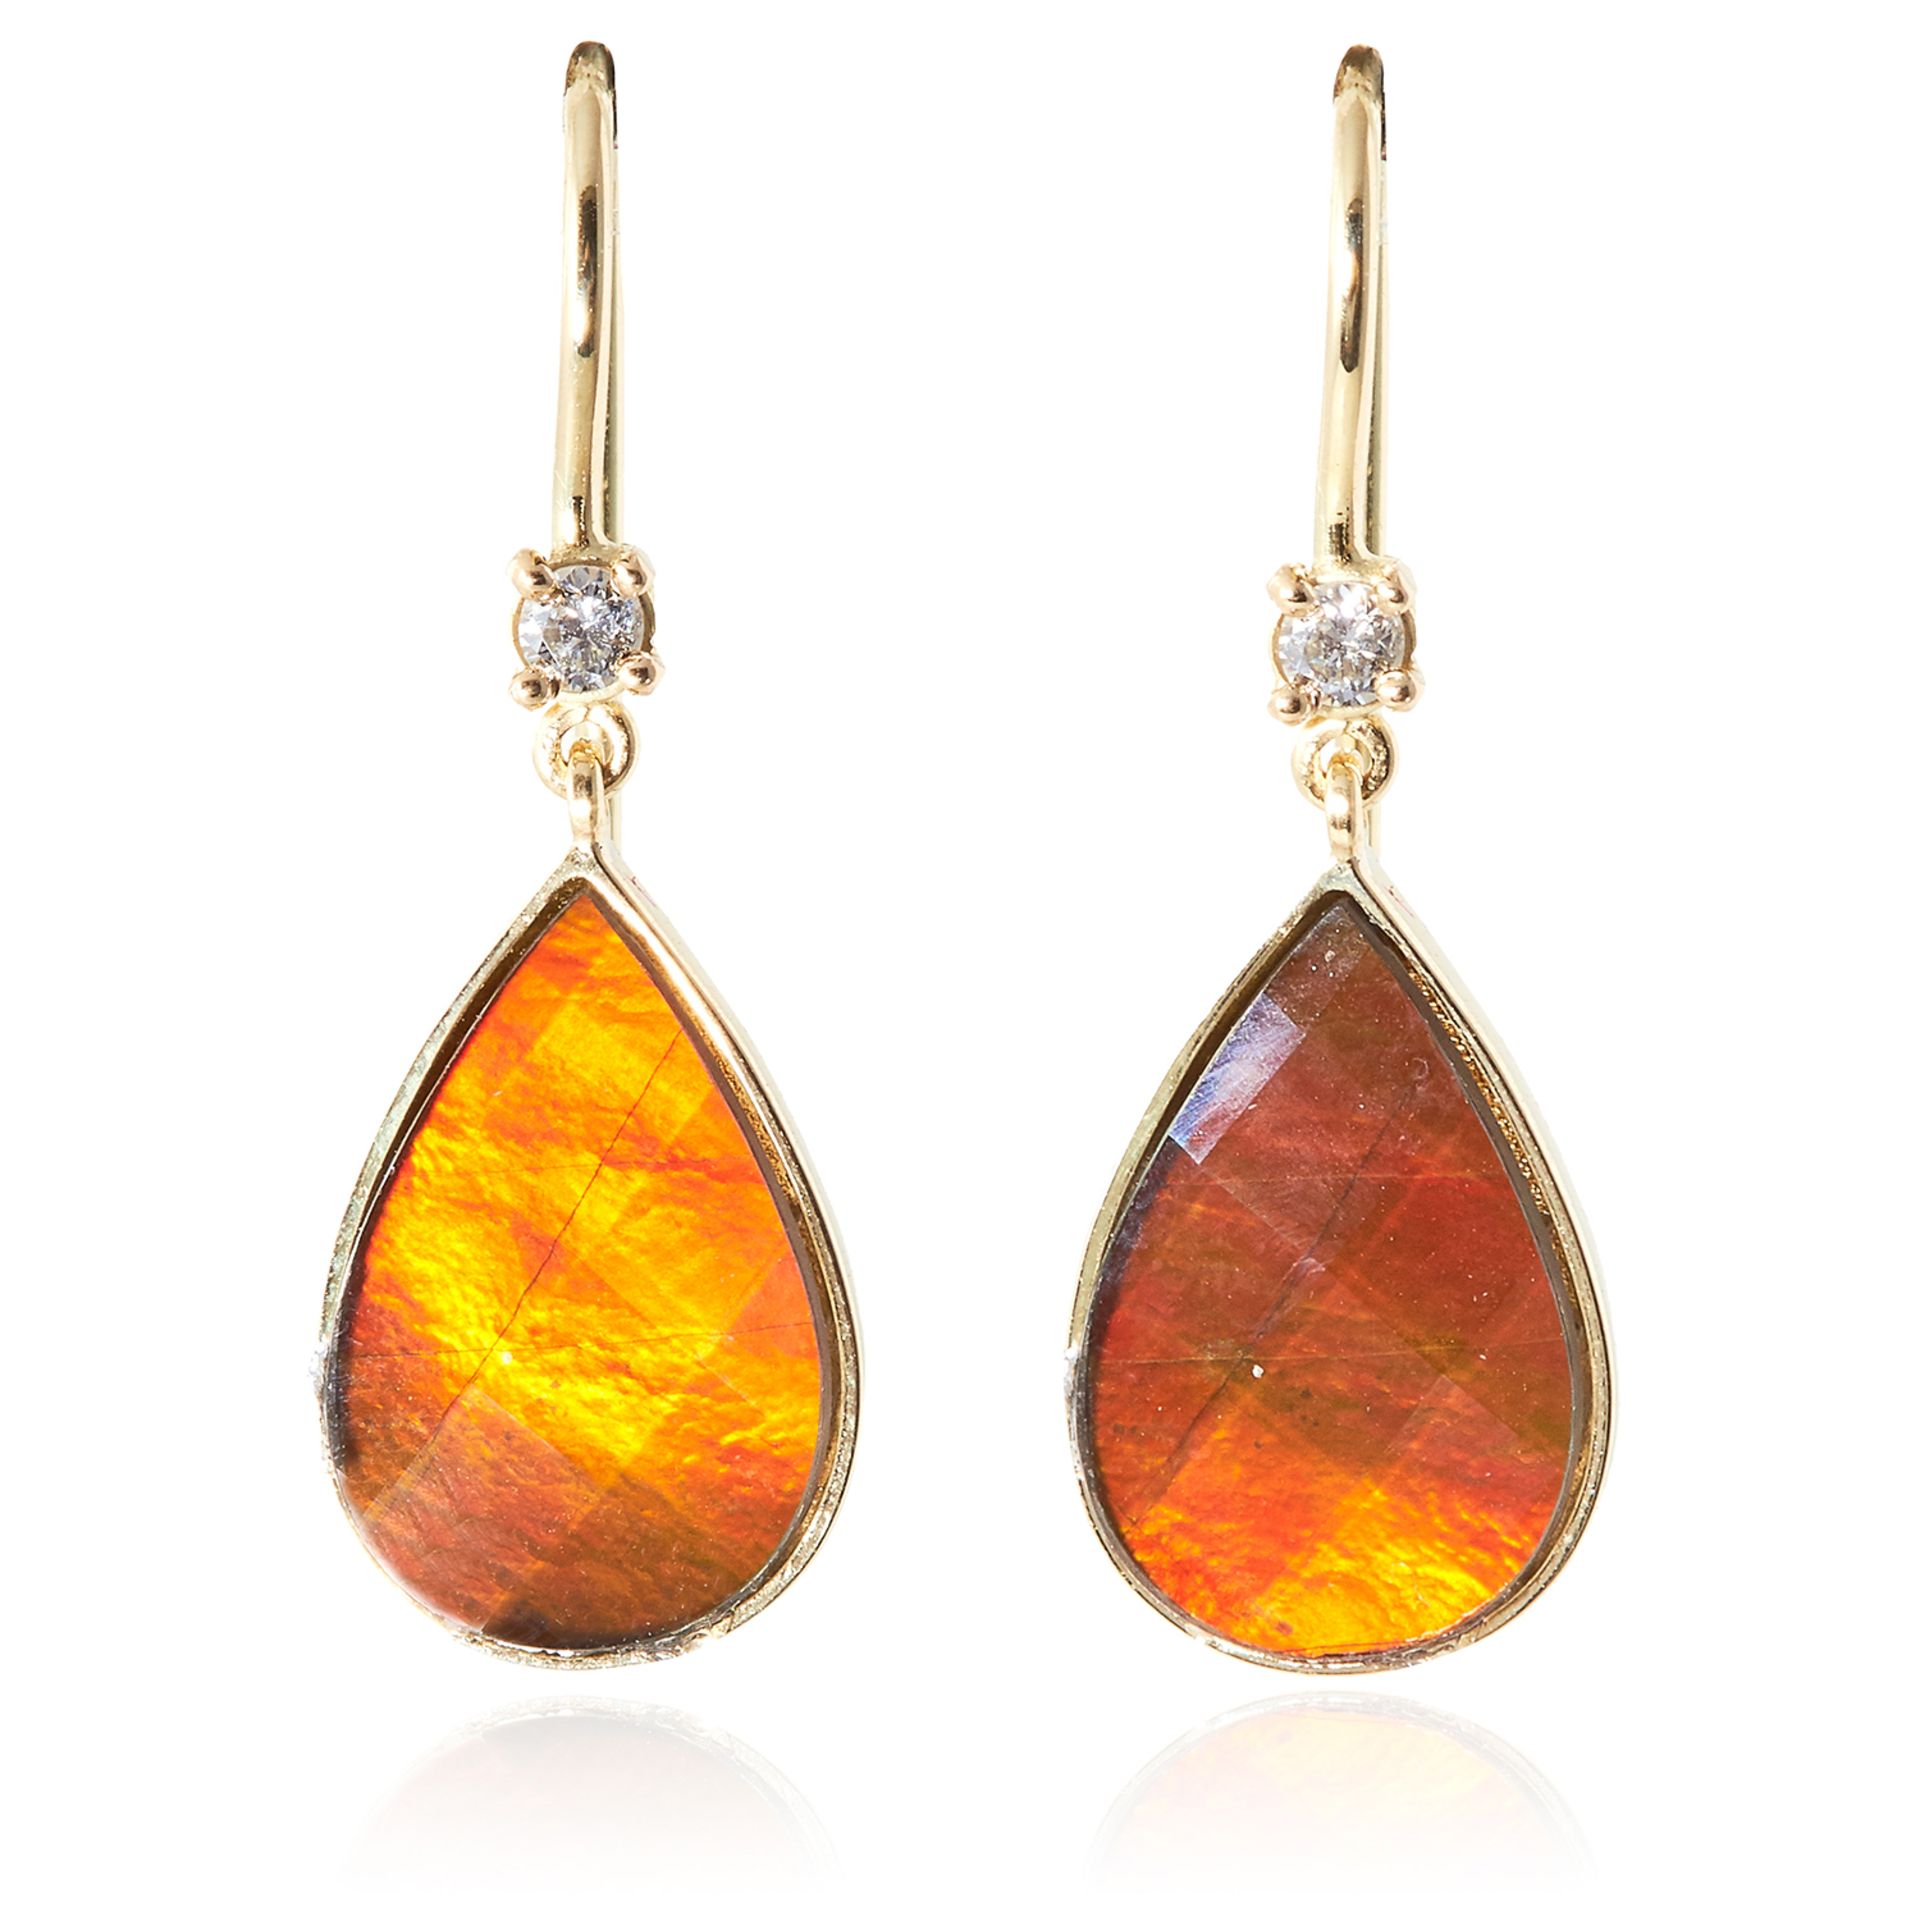 A PAIR OF AMMOLITE AND DIAMOND EARRINGS in high carat yellow gold, each set with a pear shaped